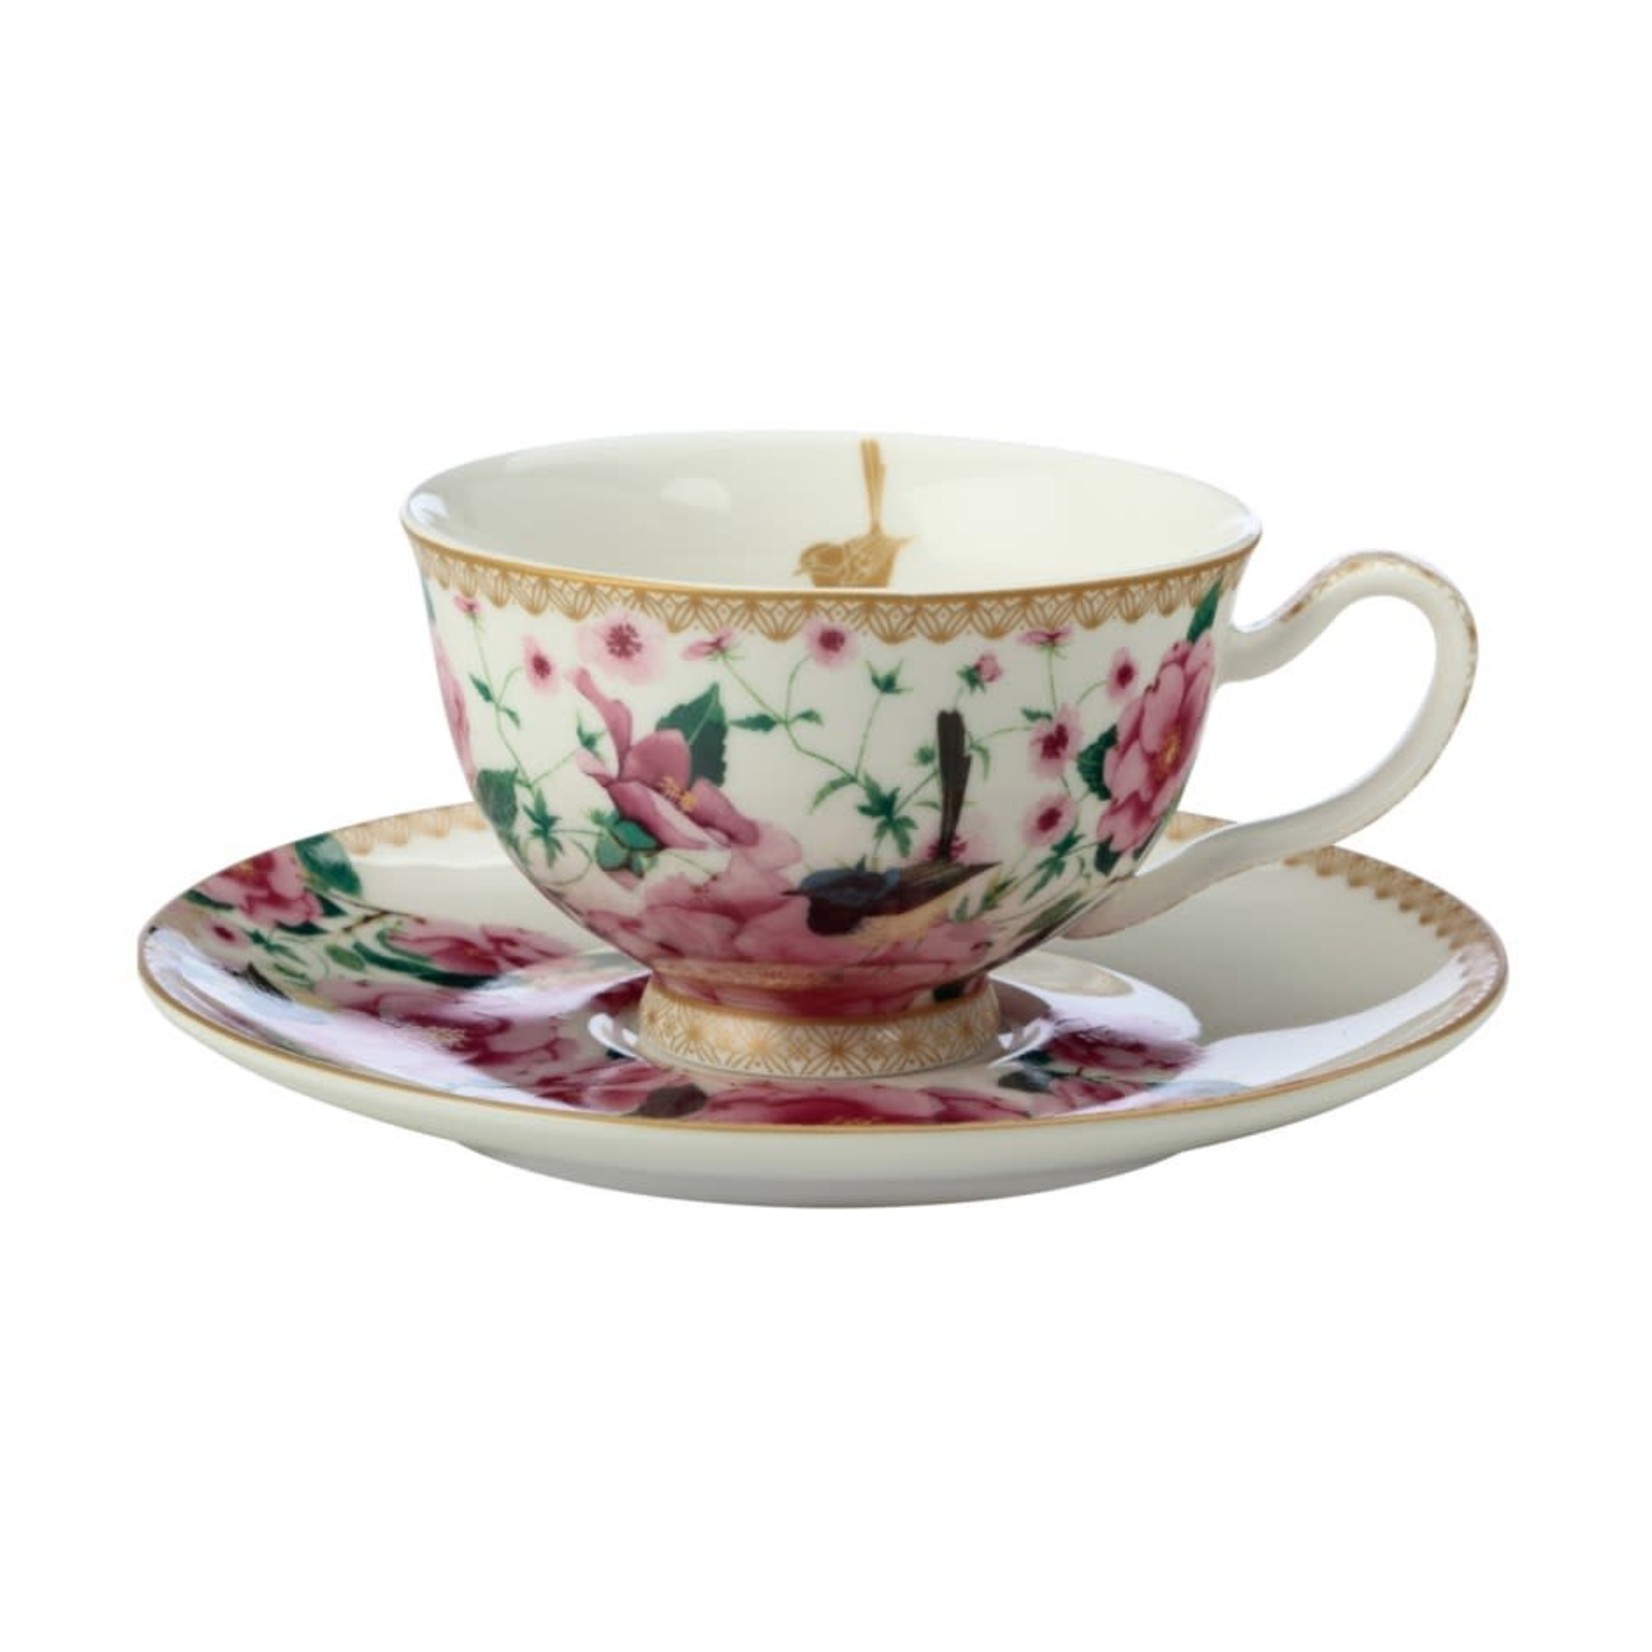 MAXWELL WILLIAMS MAXWELL WILLIAMS Silk Road Footed Cup & Saucer White